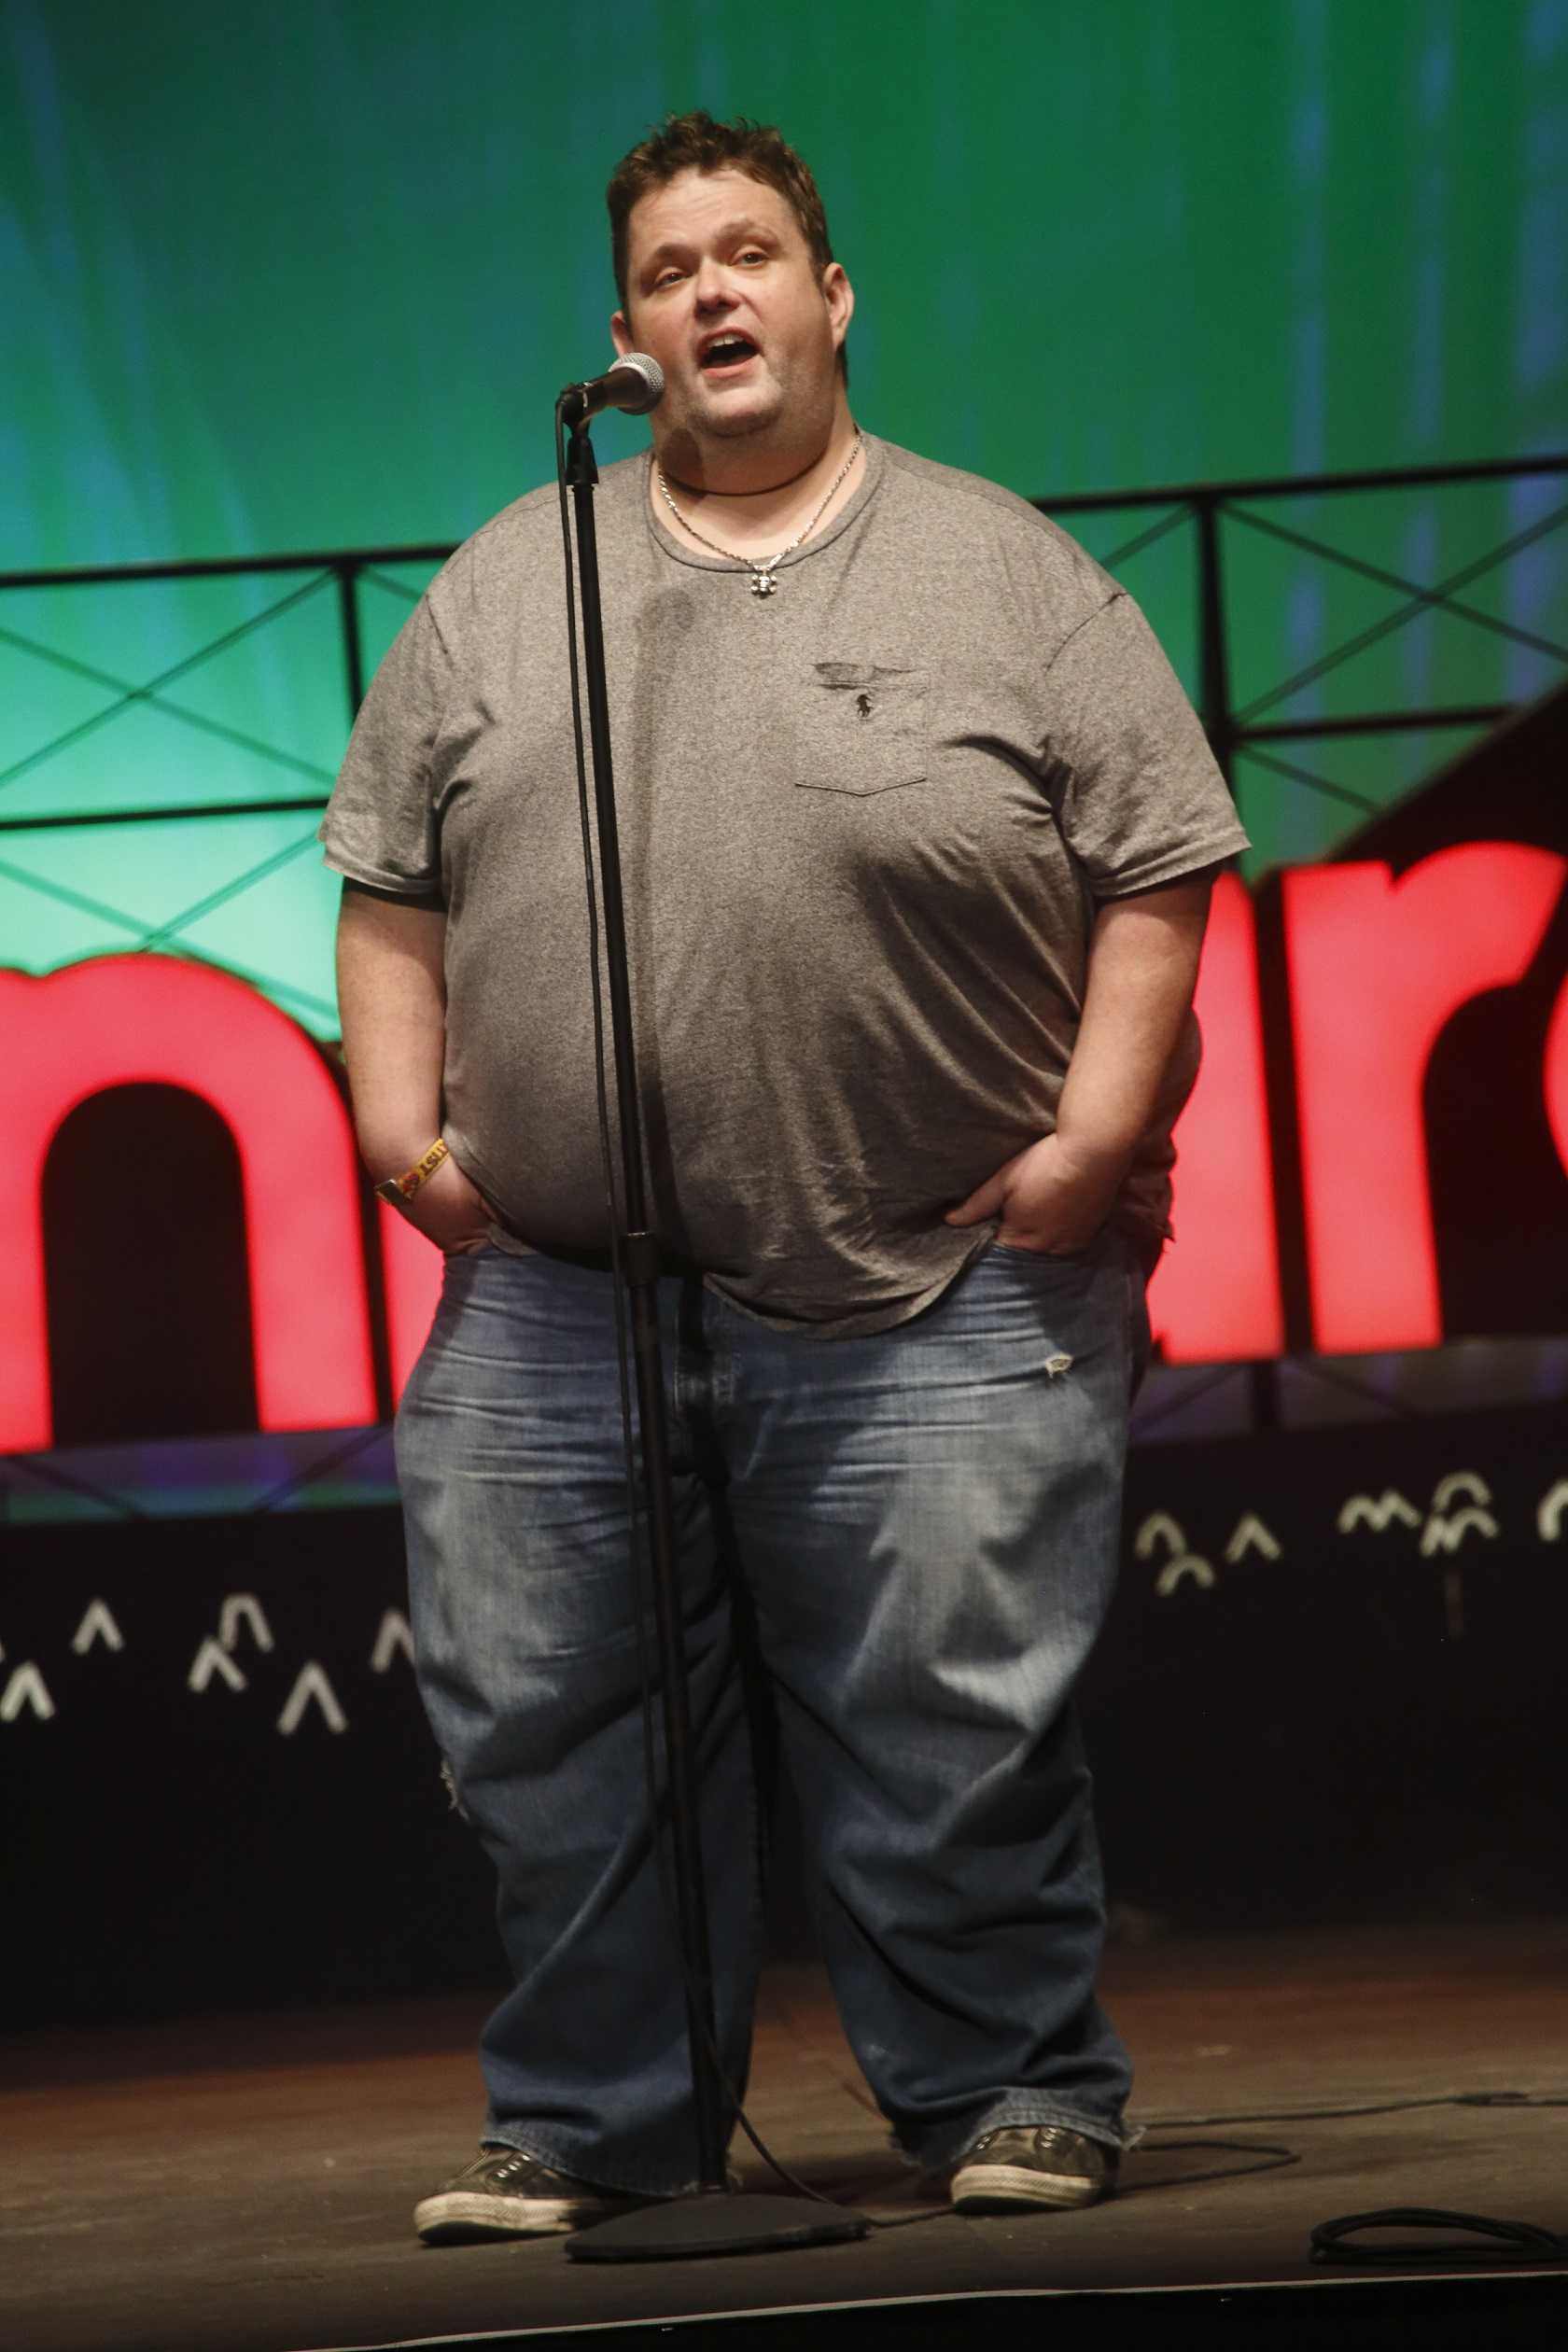 Comedian Ralphie May dies at 45 from cardiac arrest - Albuquerque news ...